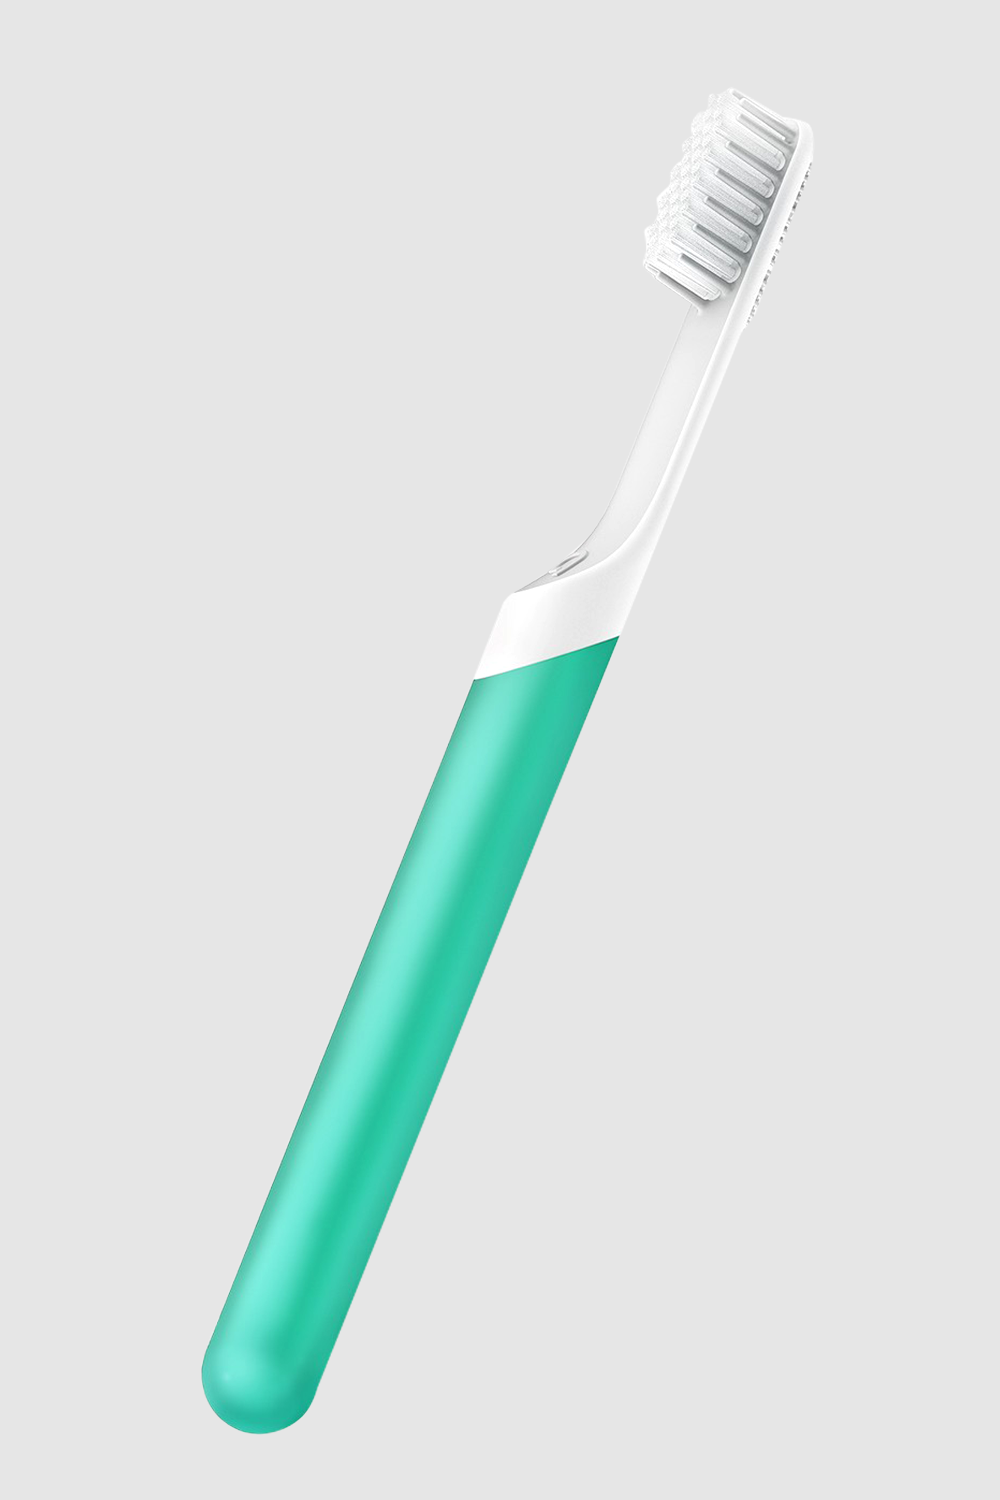 quip toothbrush reviews 2018